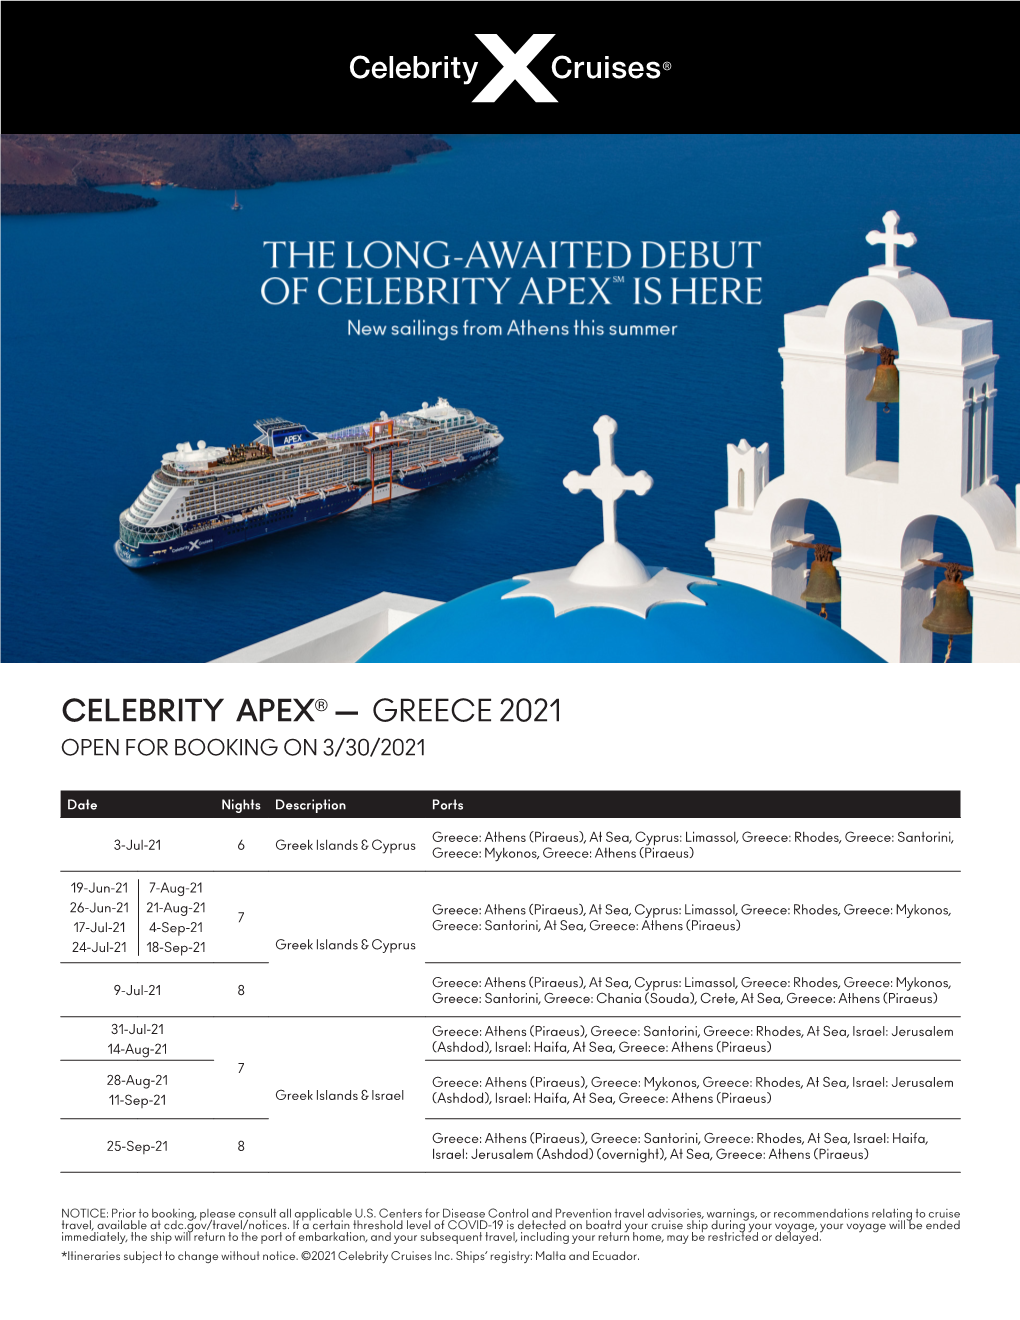 Celebrity Apex® — Greece 2021 Open for Booking on 3/30/2021